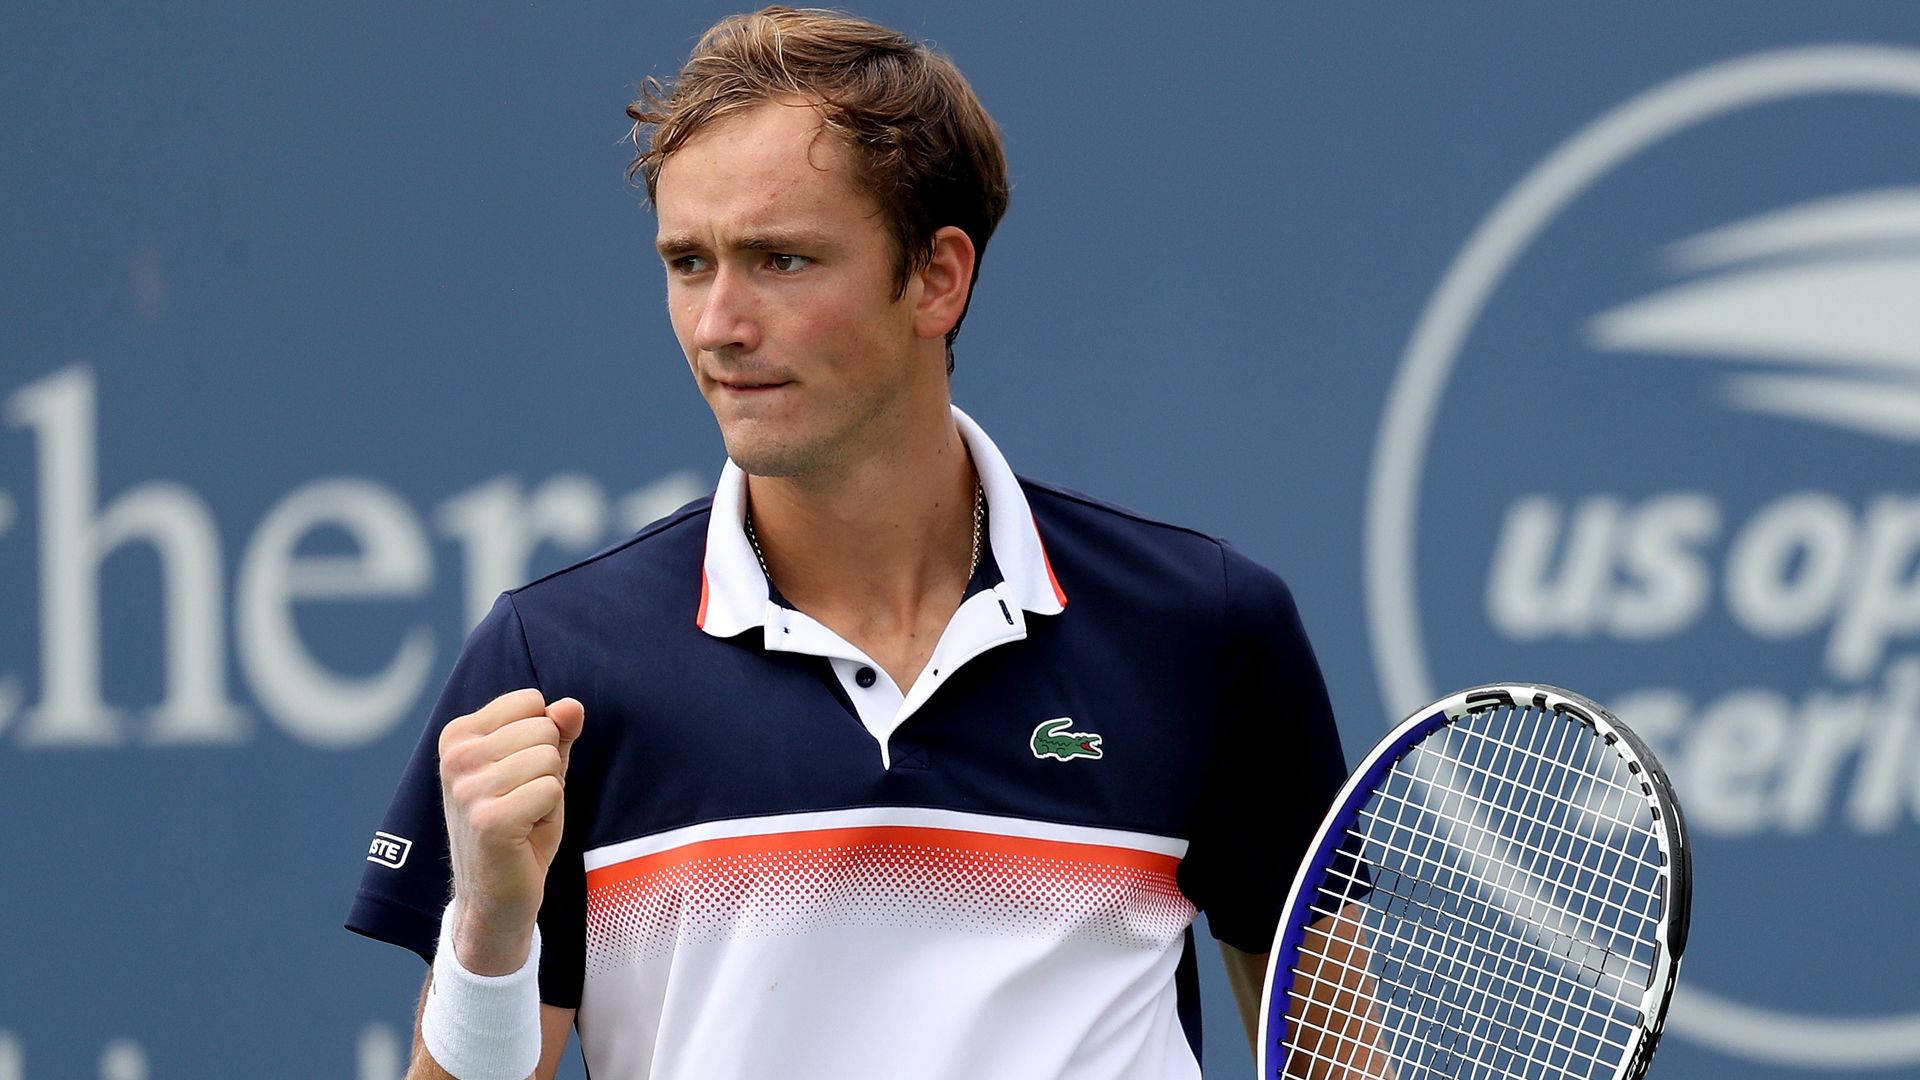 Daniil Medvedev Triumphantly Clenching Fist After A Win Background